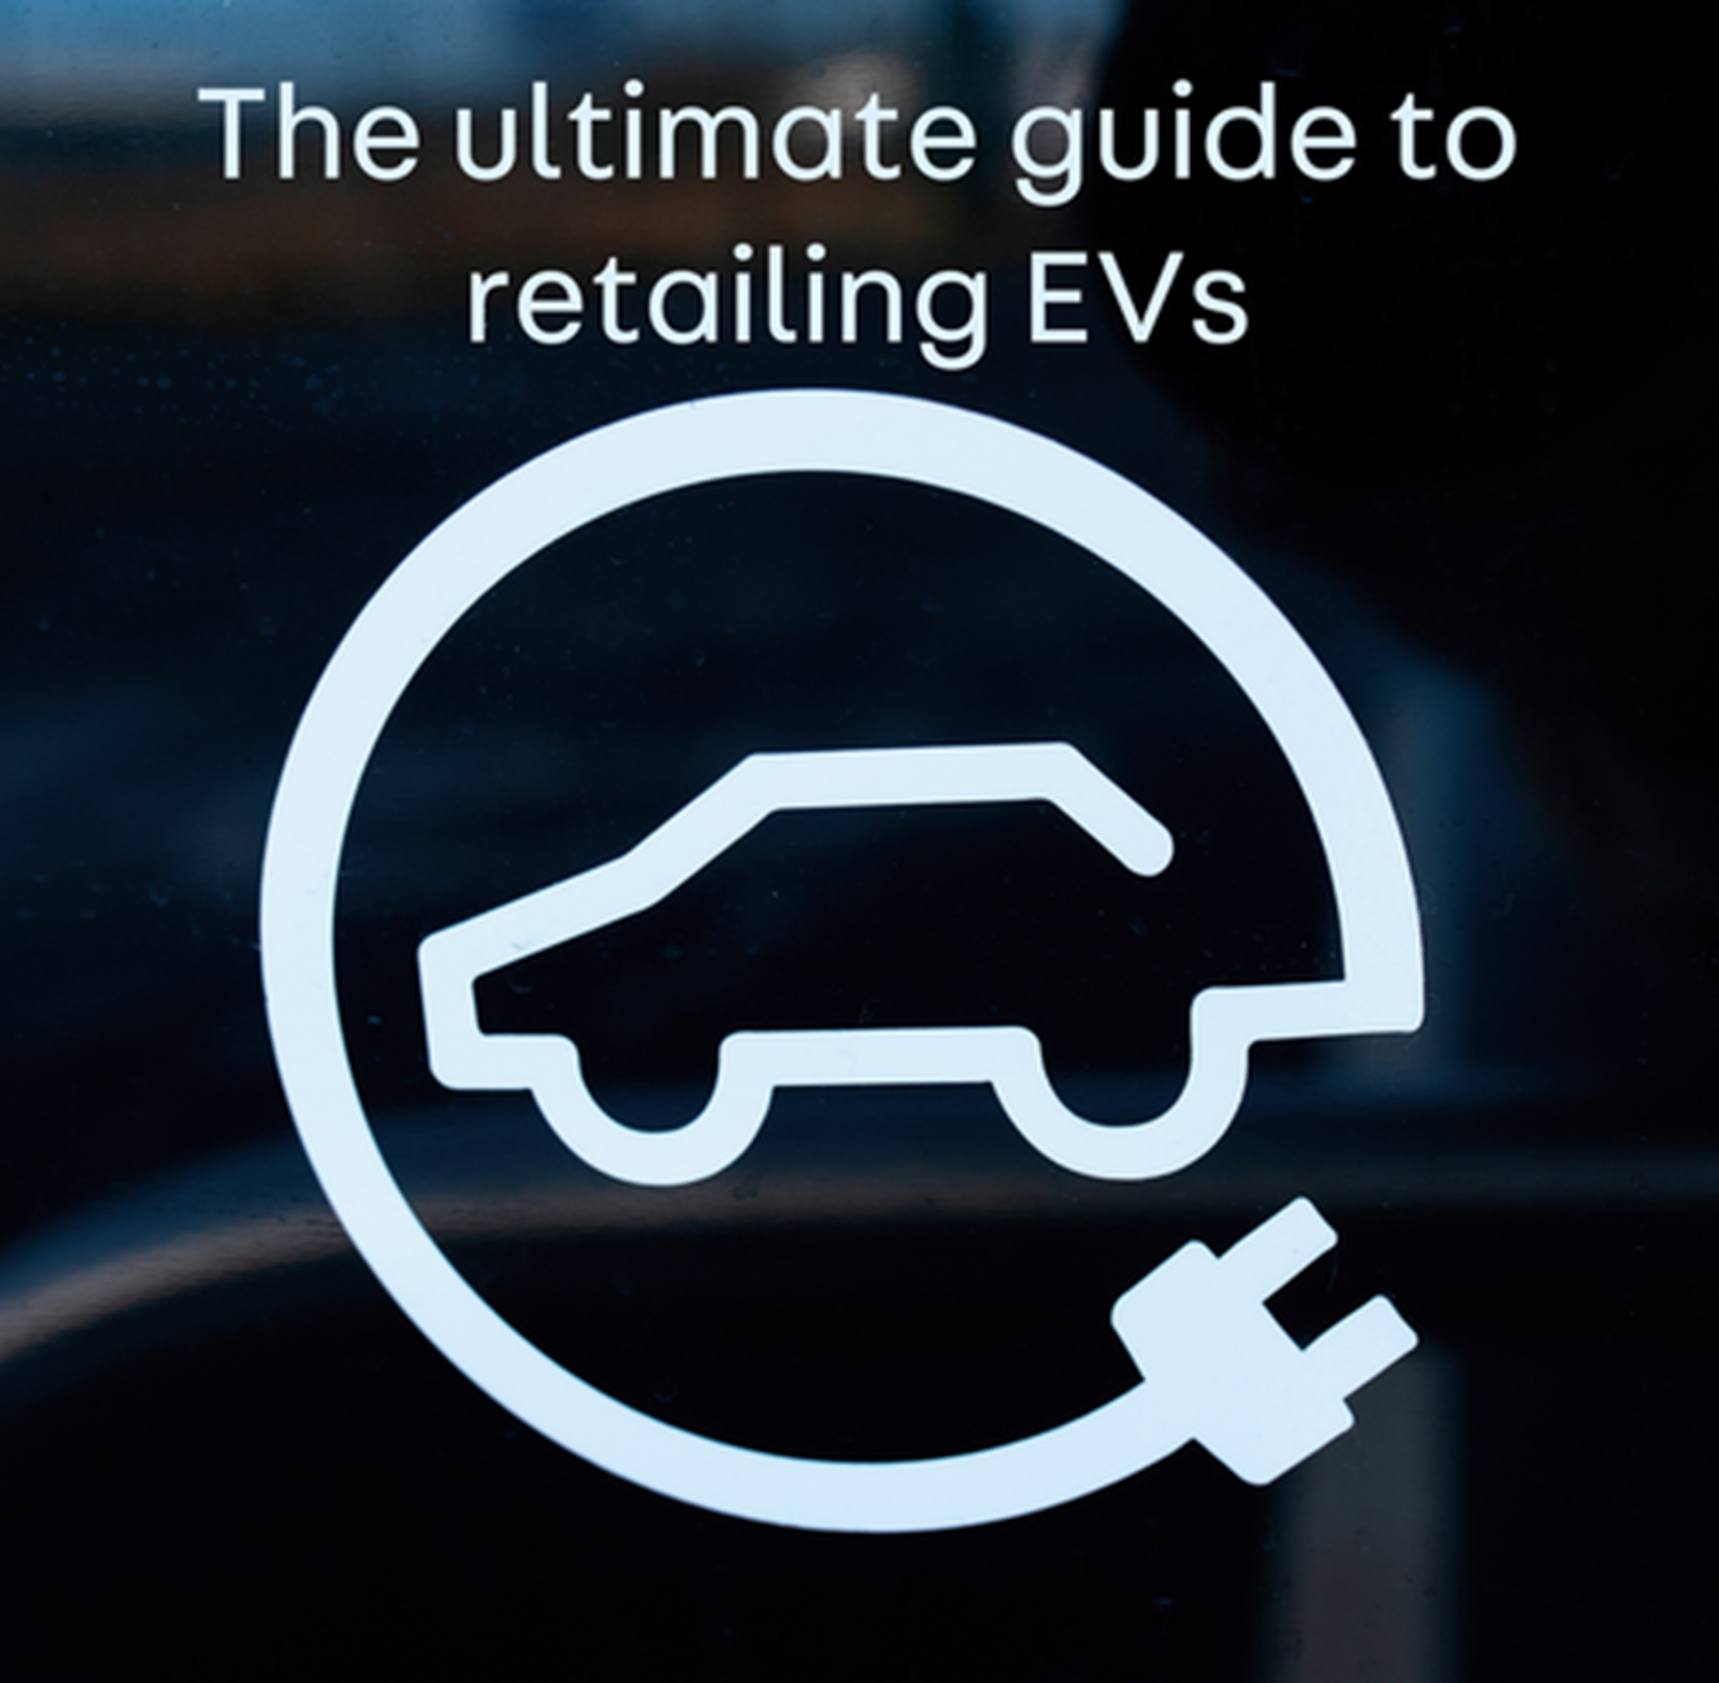 The ultimate guide to retailing electric vehicles